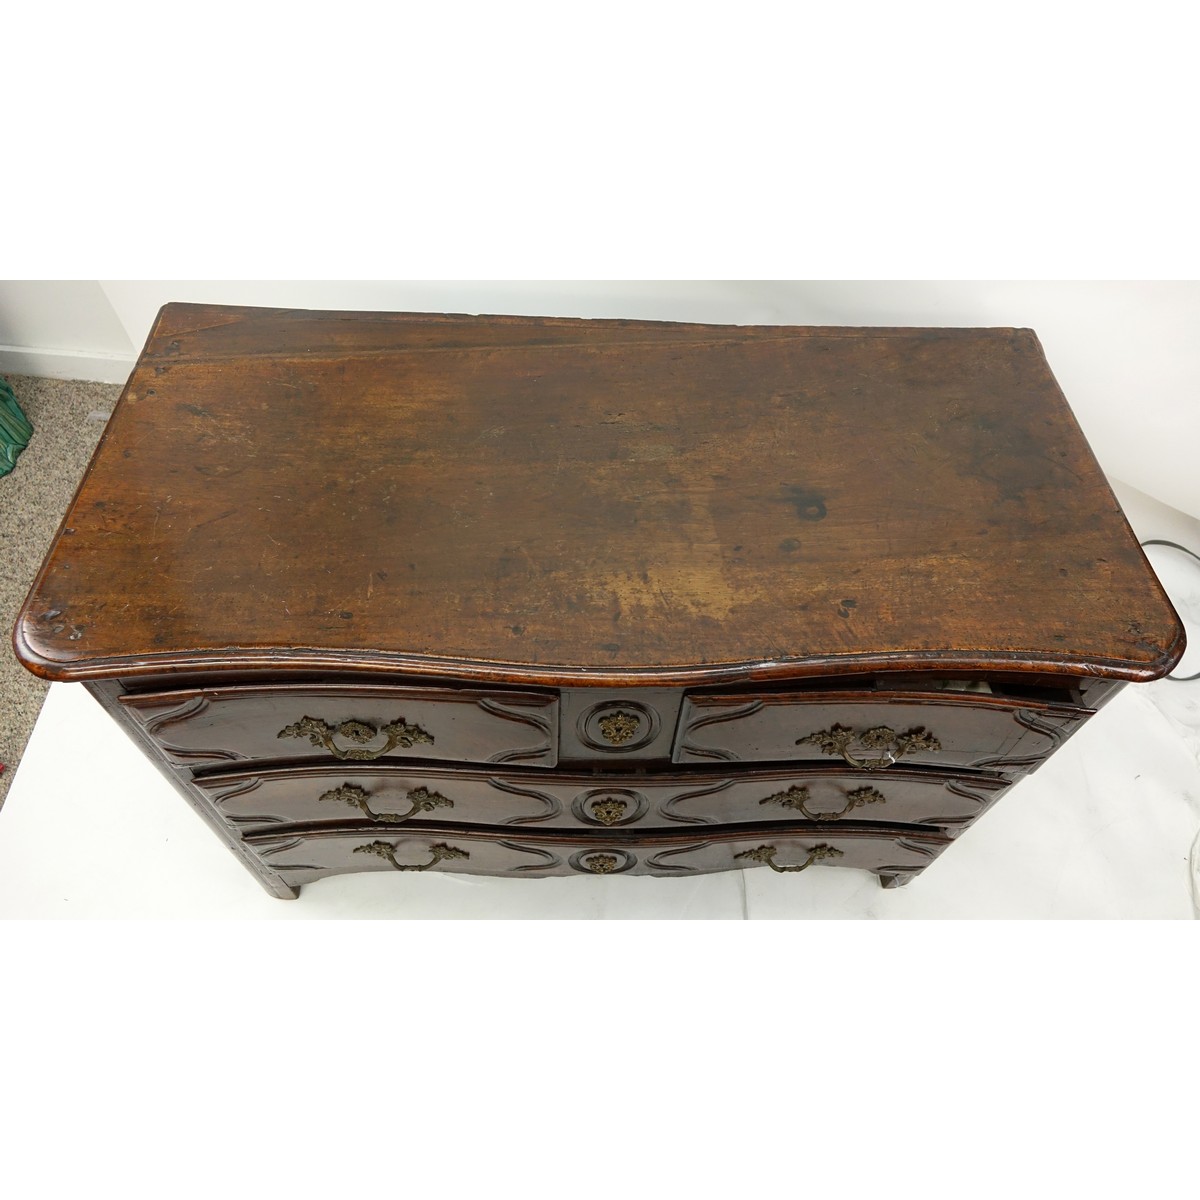 18/19th Century French Bronze Mounted, Carved Walnut Commode/Chest of Drawers. Two short sliding drawers with two large drawers, stands on bracket feet.